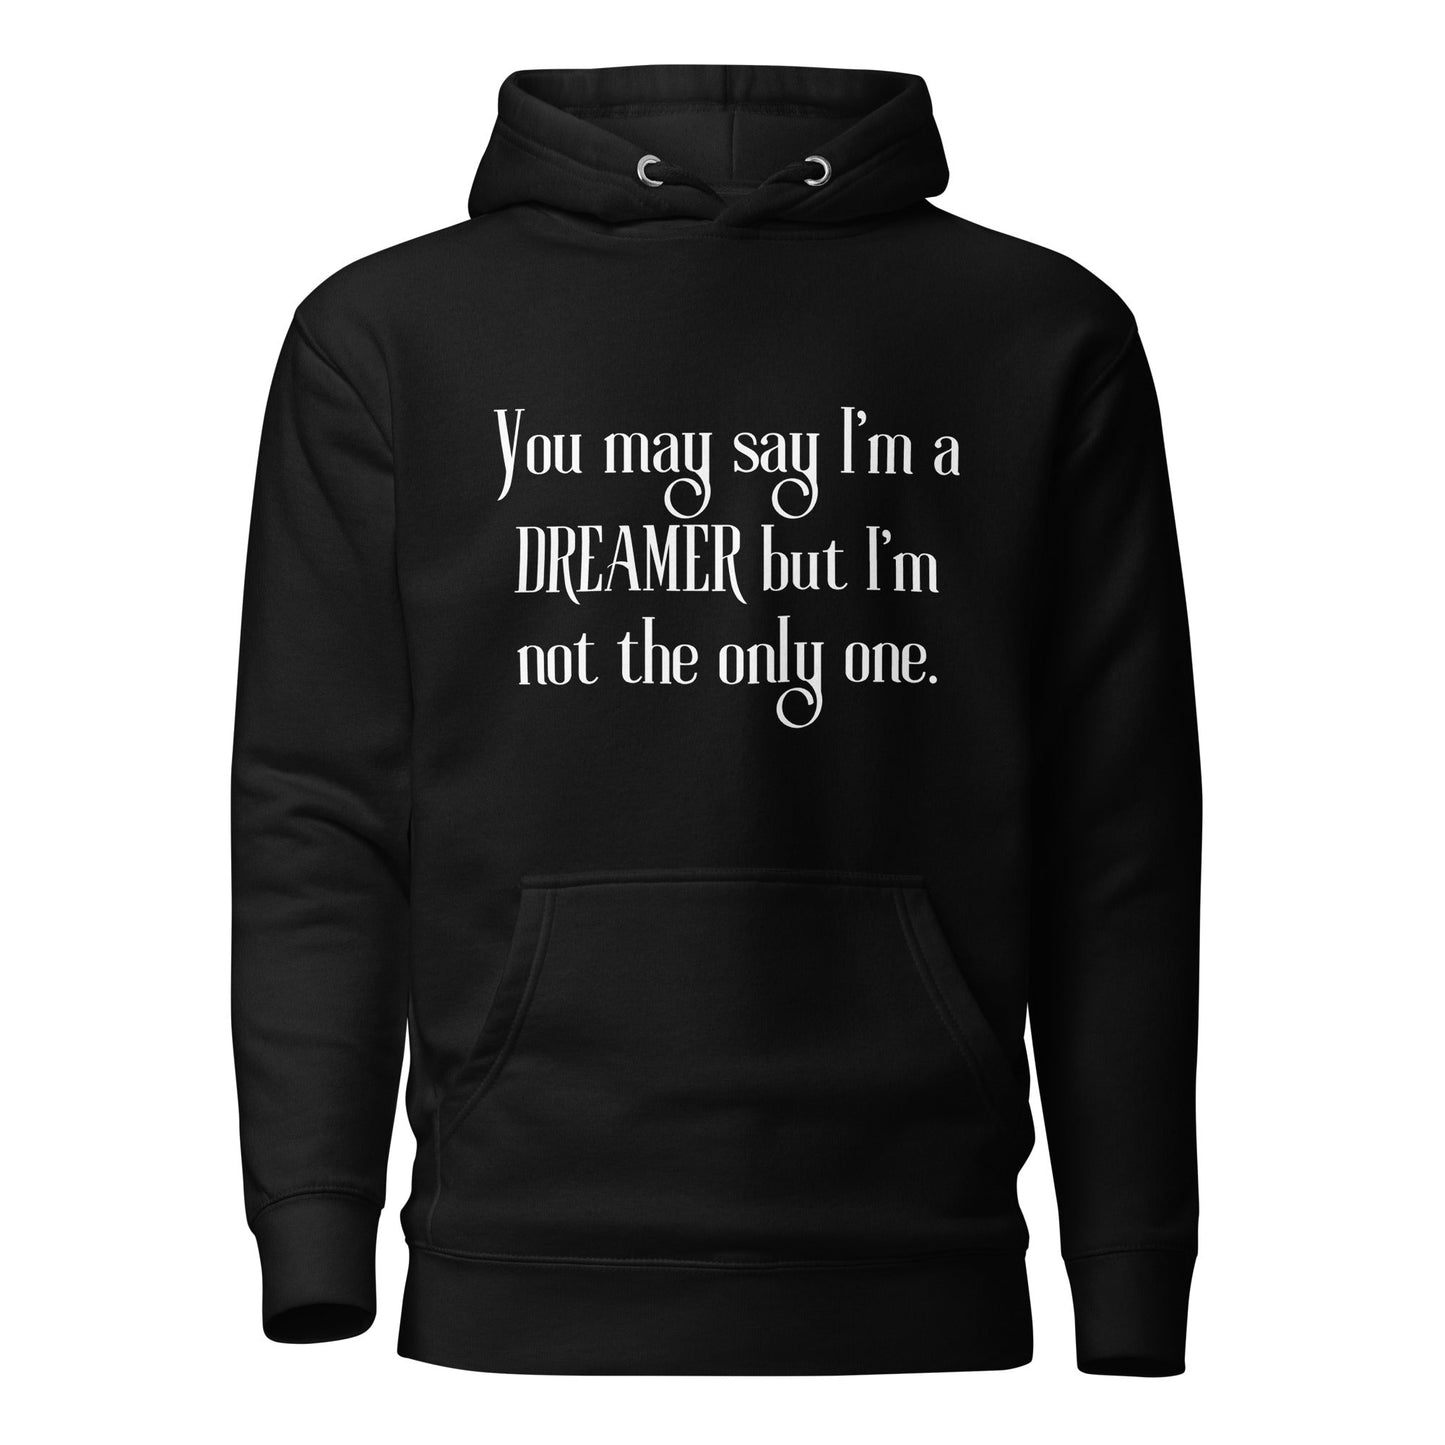 Dreamer Graphic Unisex Hoodie | Fun Graphic Hooded